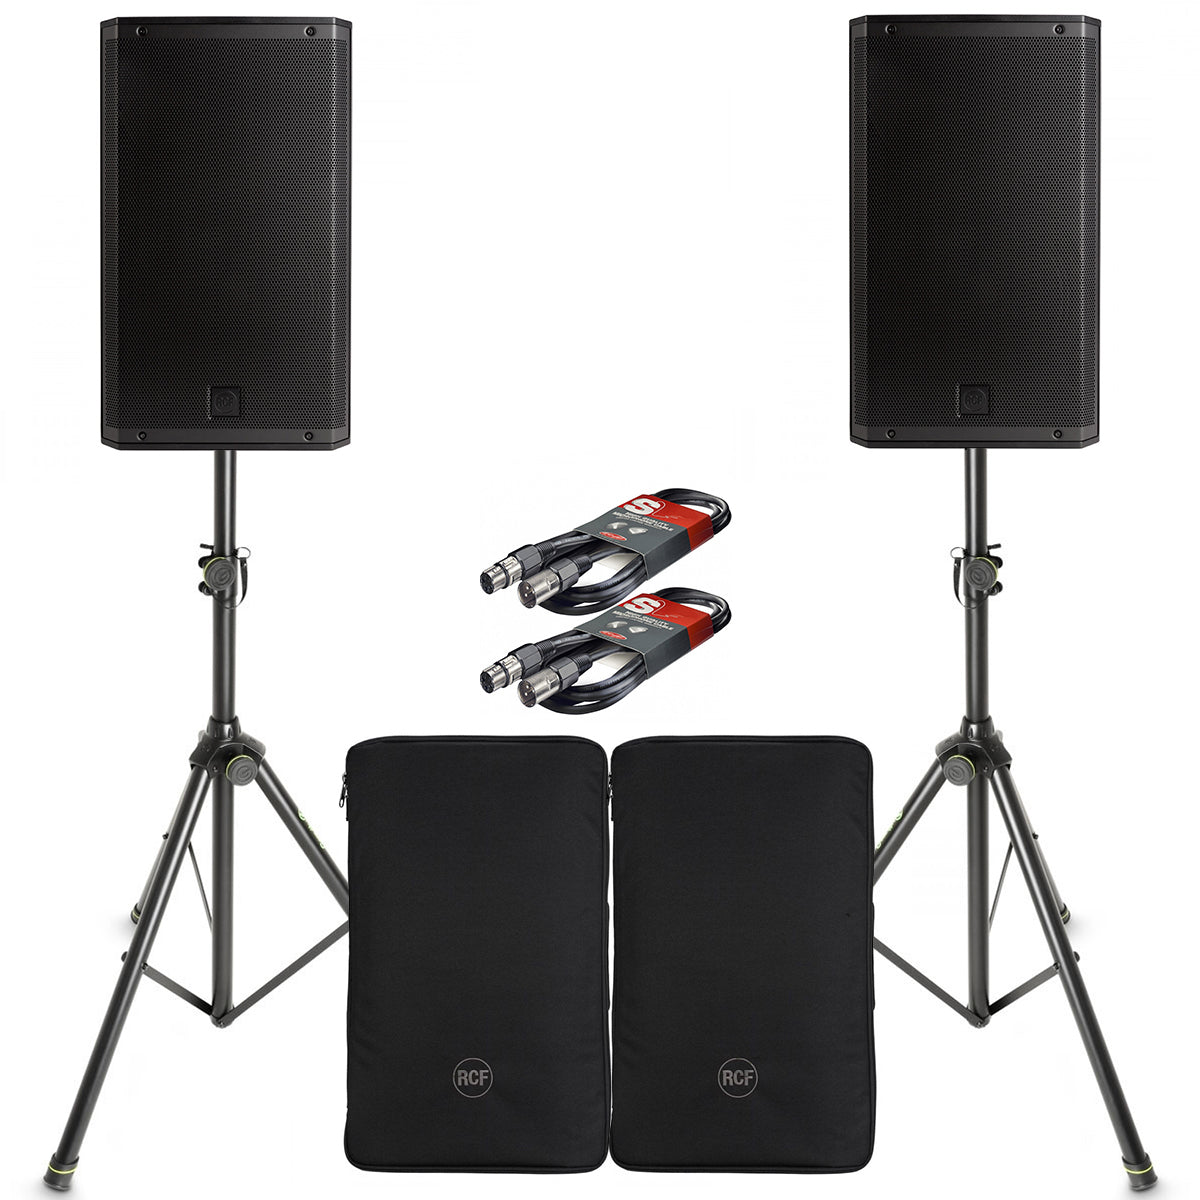 RCF ART 912-A Pair with Covers, Stands & Cables